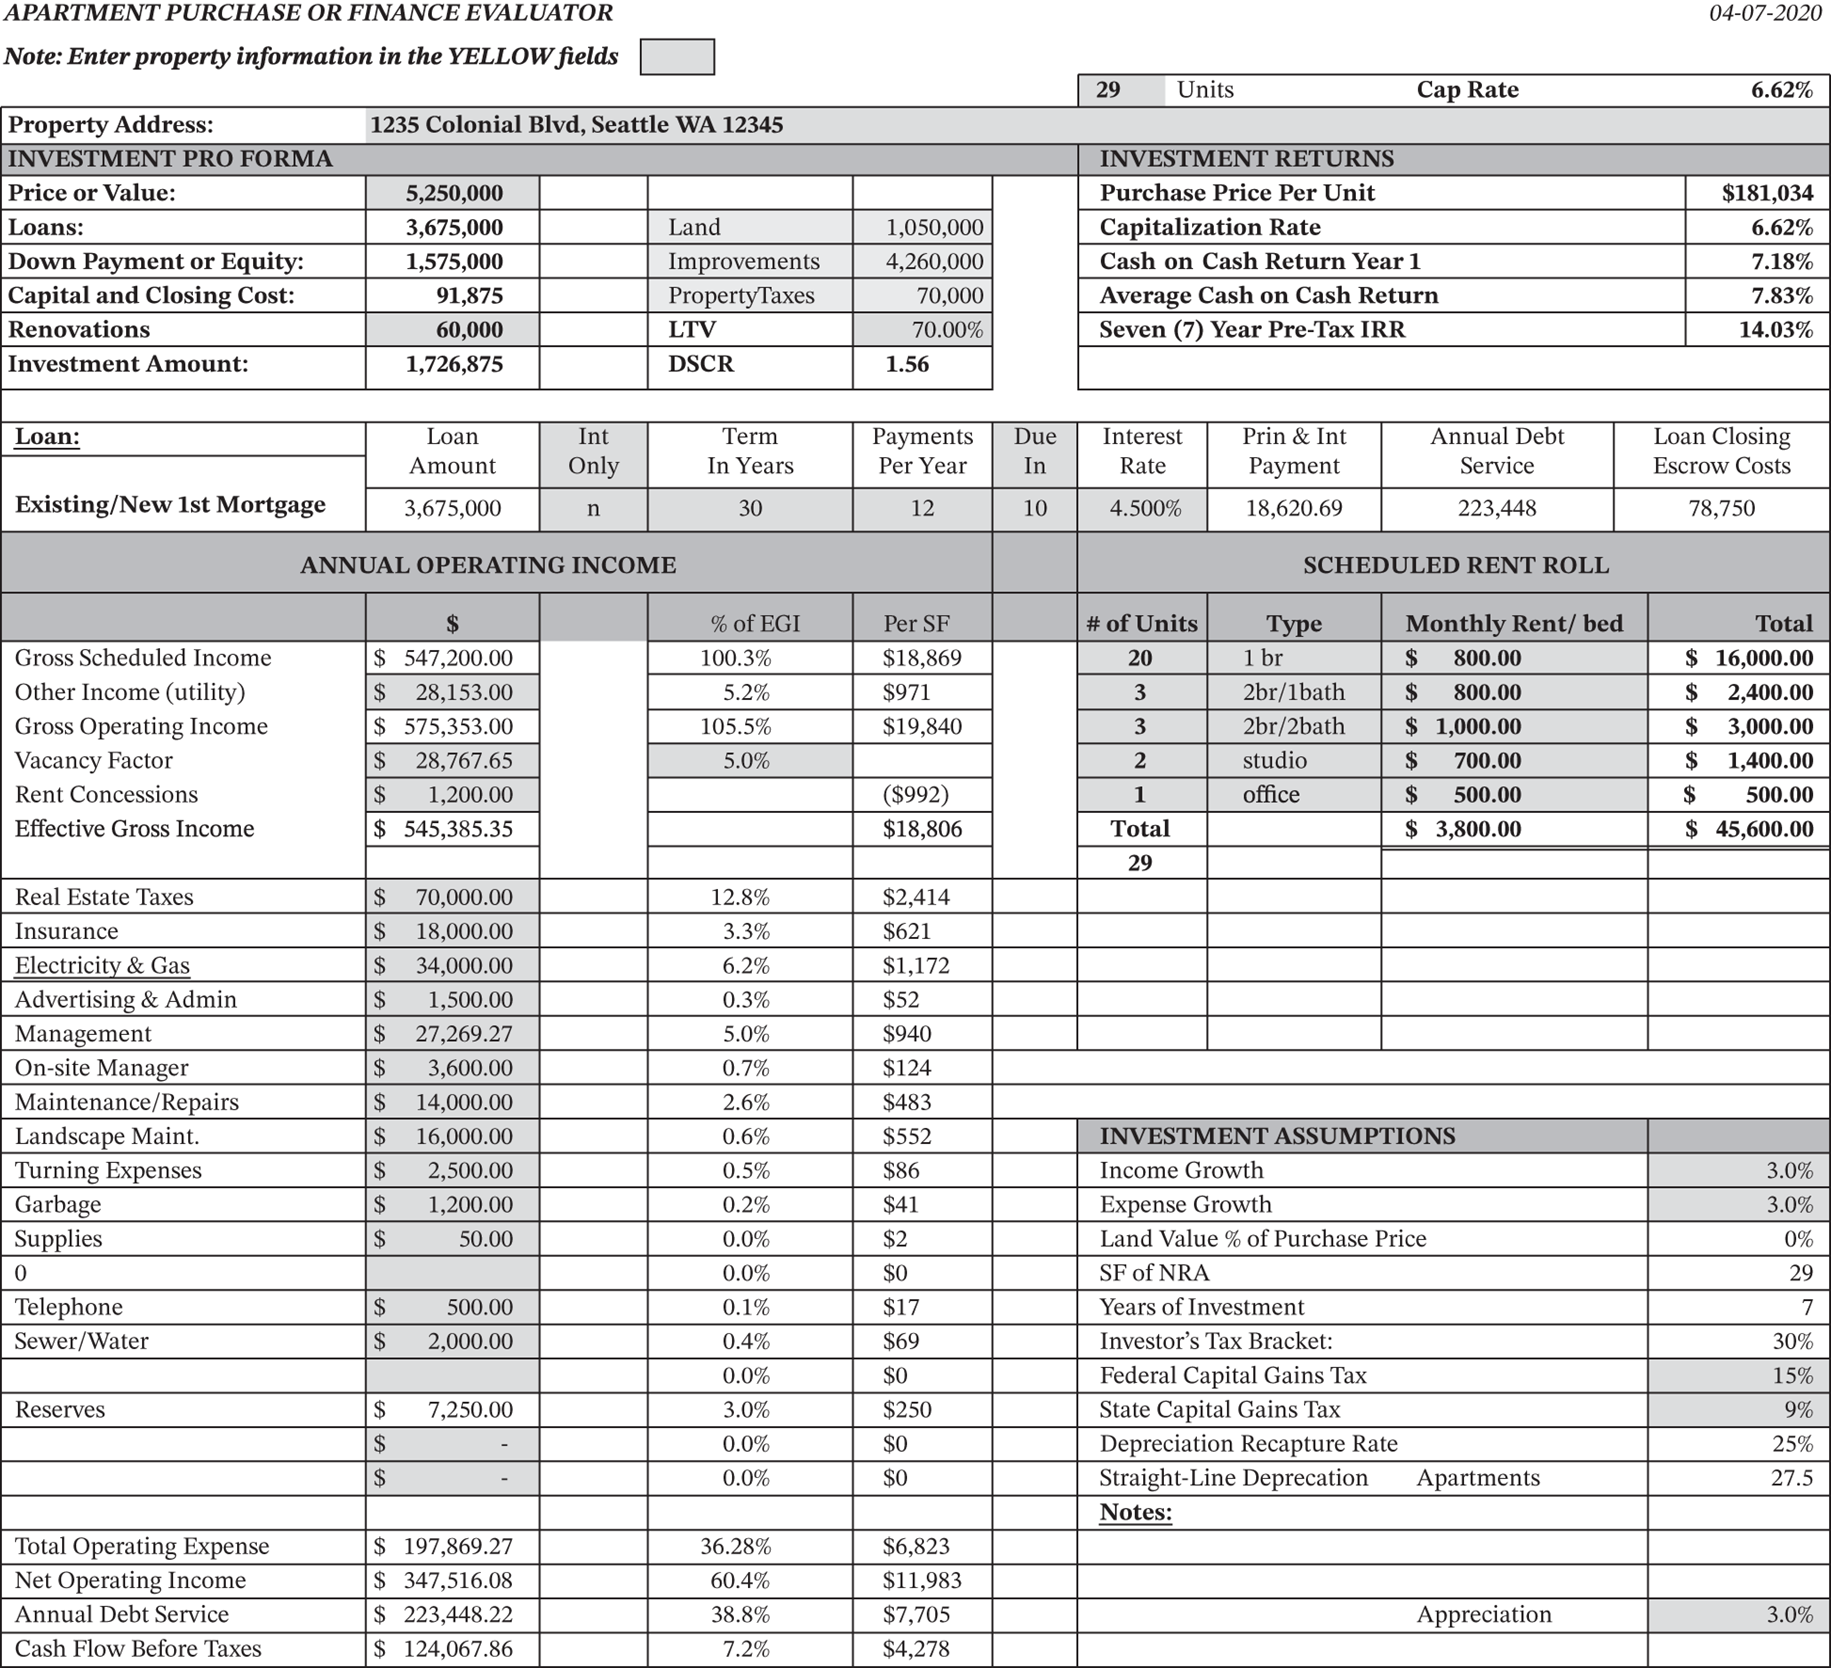 Tabular representation of the commercial purchase and finance evaluator.